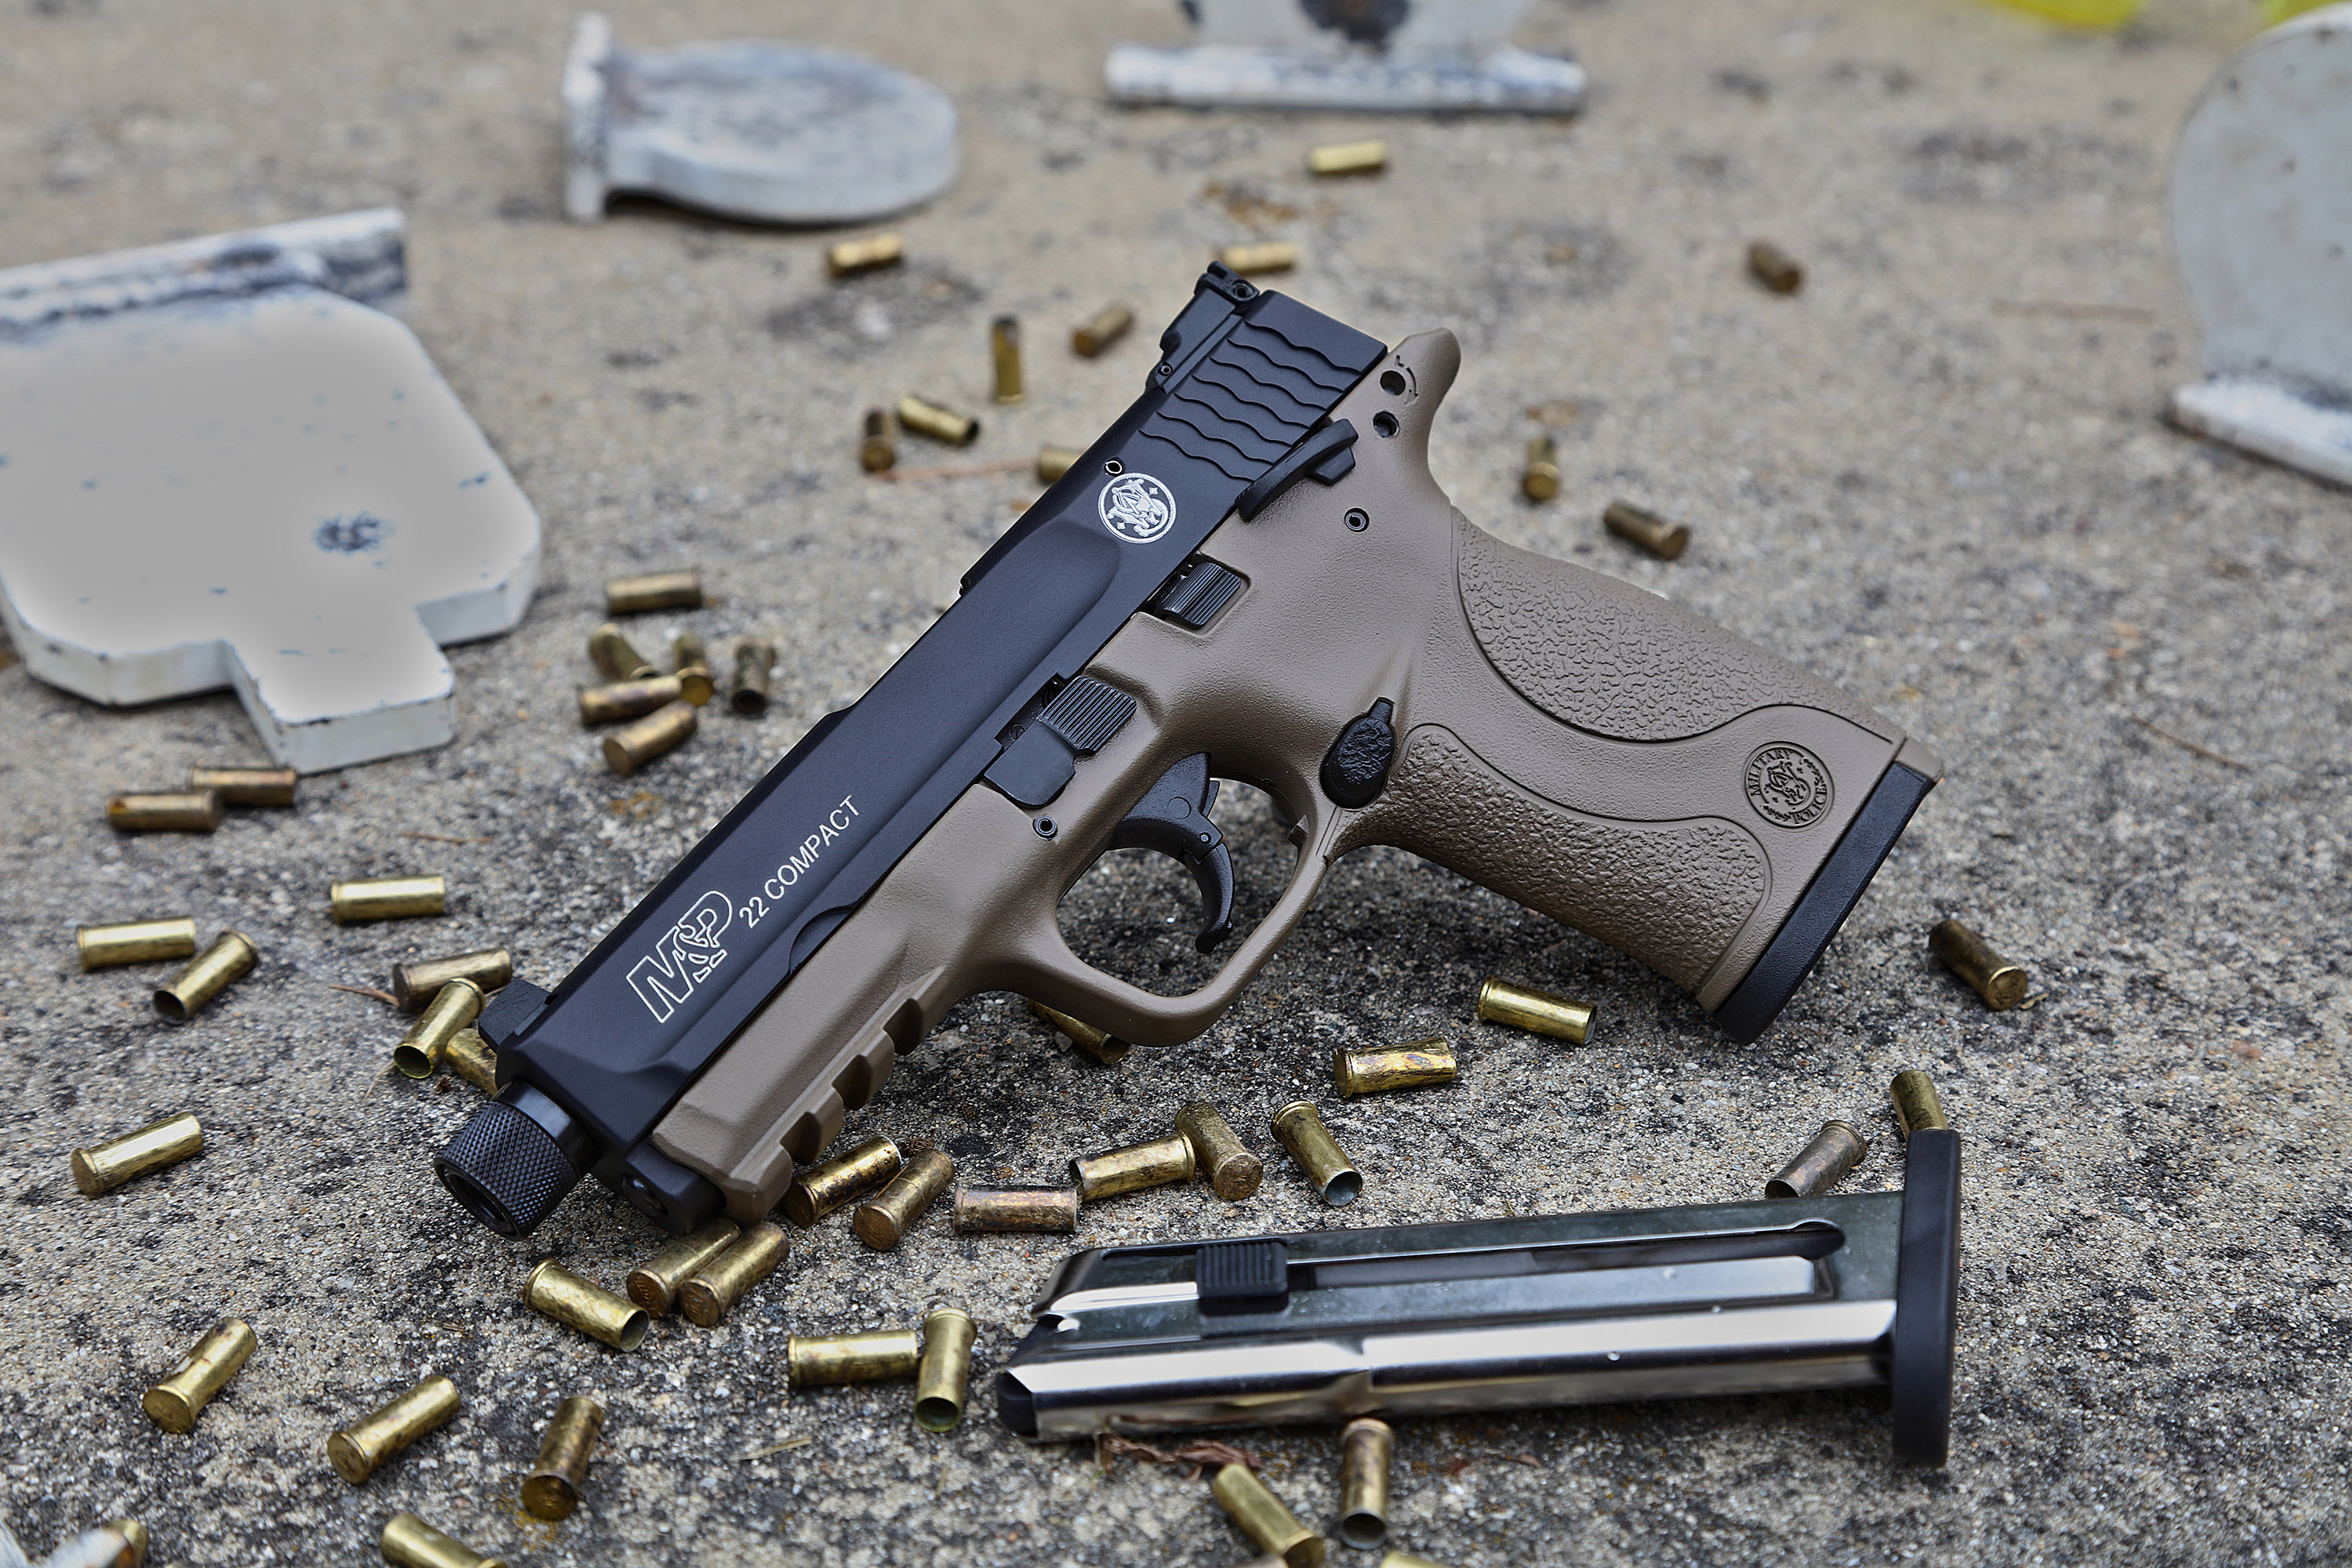 S&W Offers Popular M&P 22 Compact in Flat Dark Earth Julie Golob